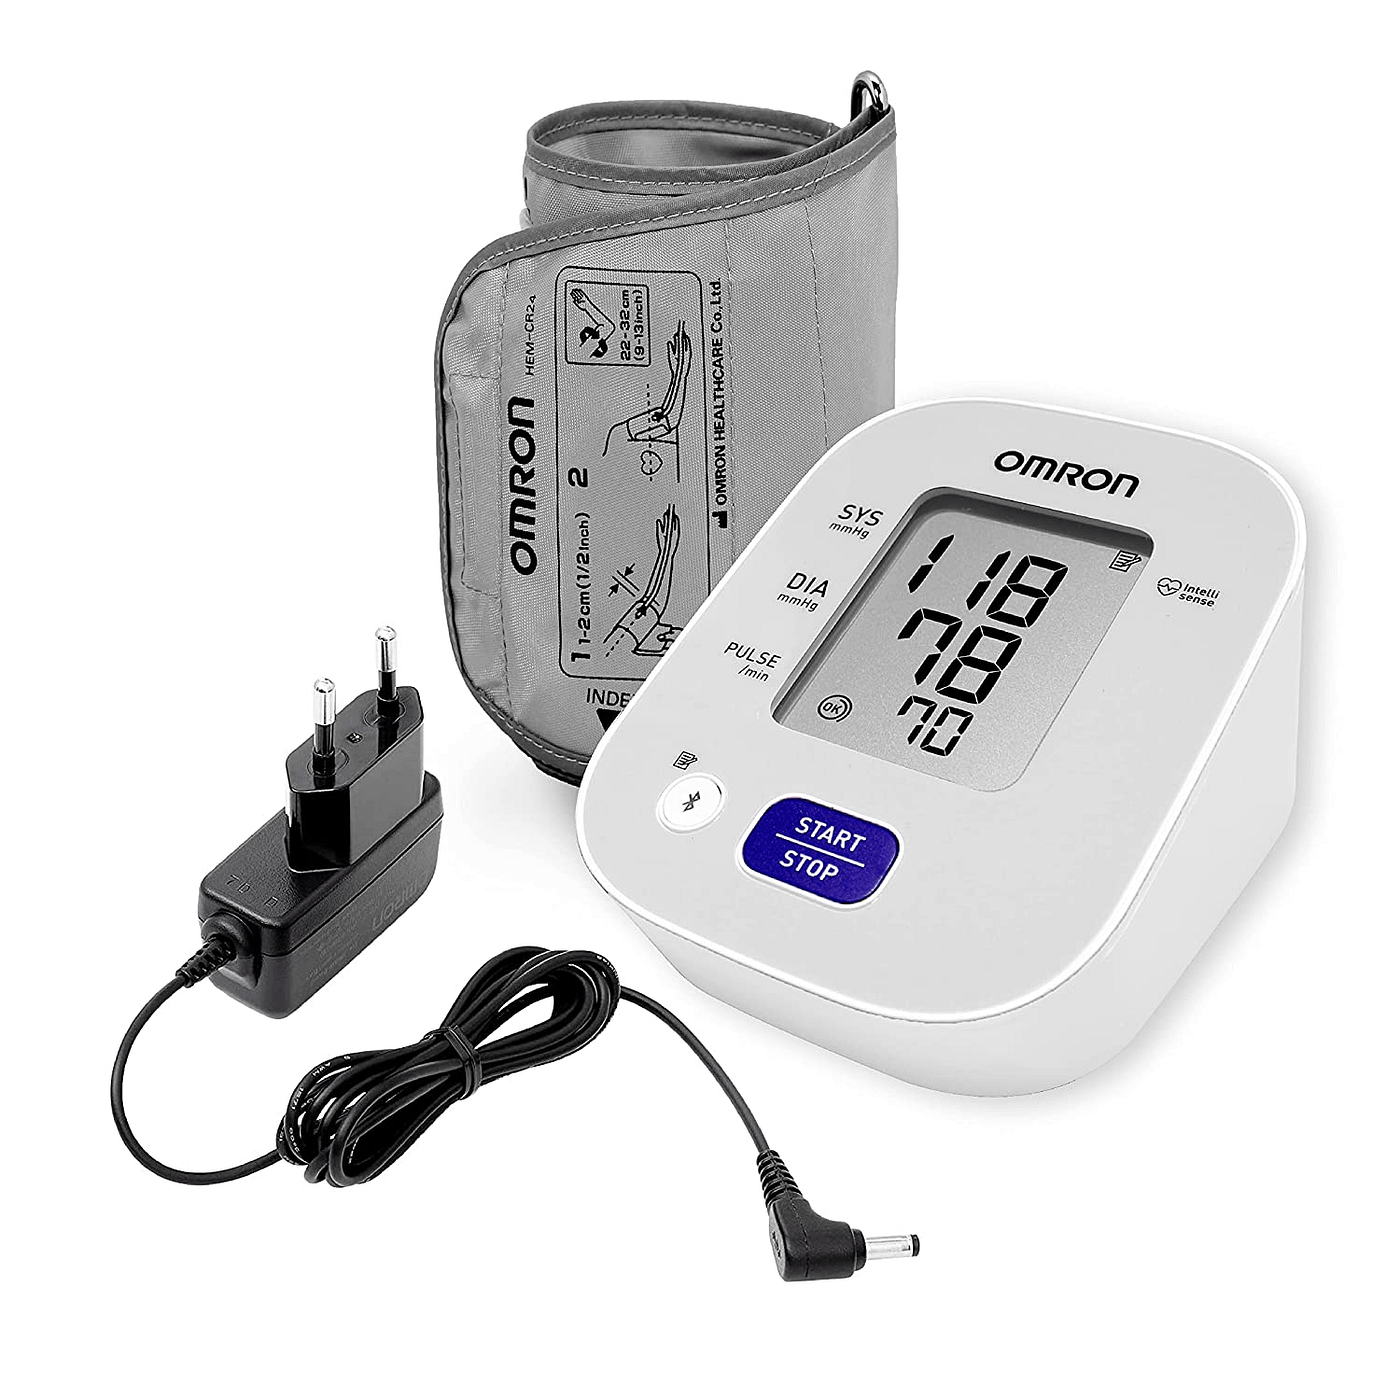 A Comprehensive Guide to Choosing an Omron Blood Pressure Check Machine |  by Medineeds | Medium